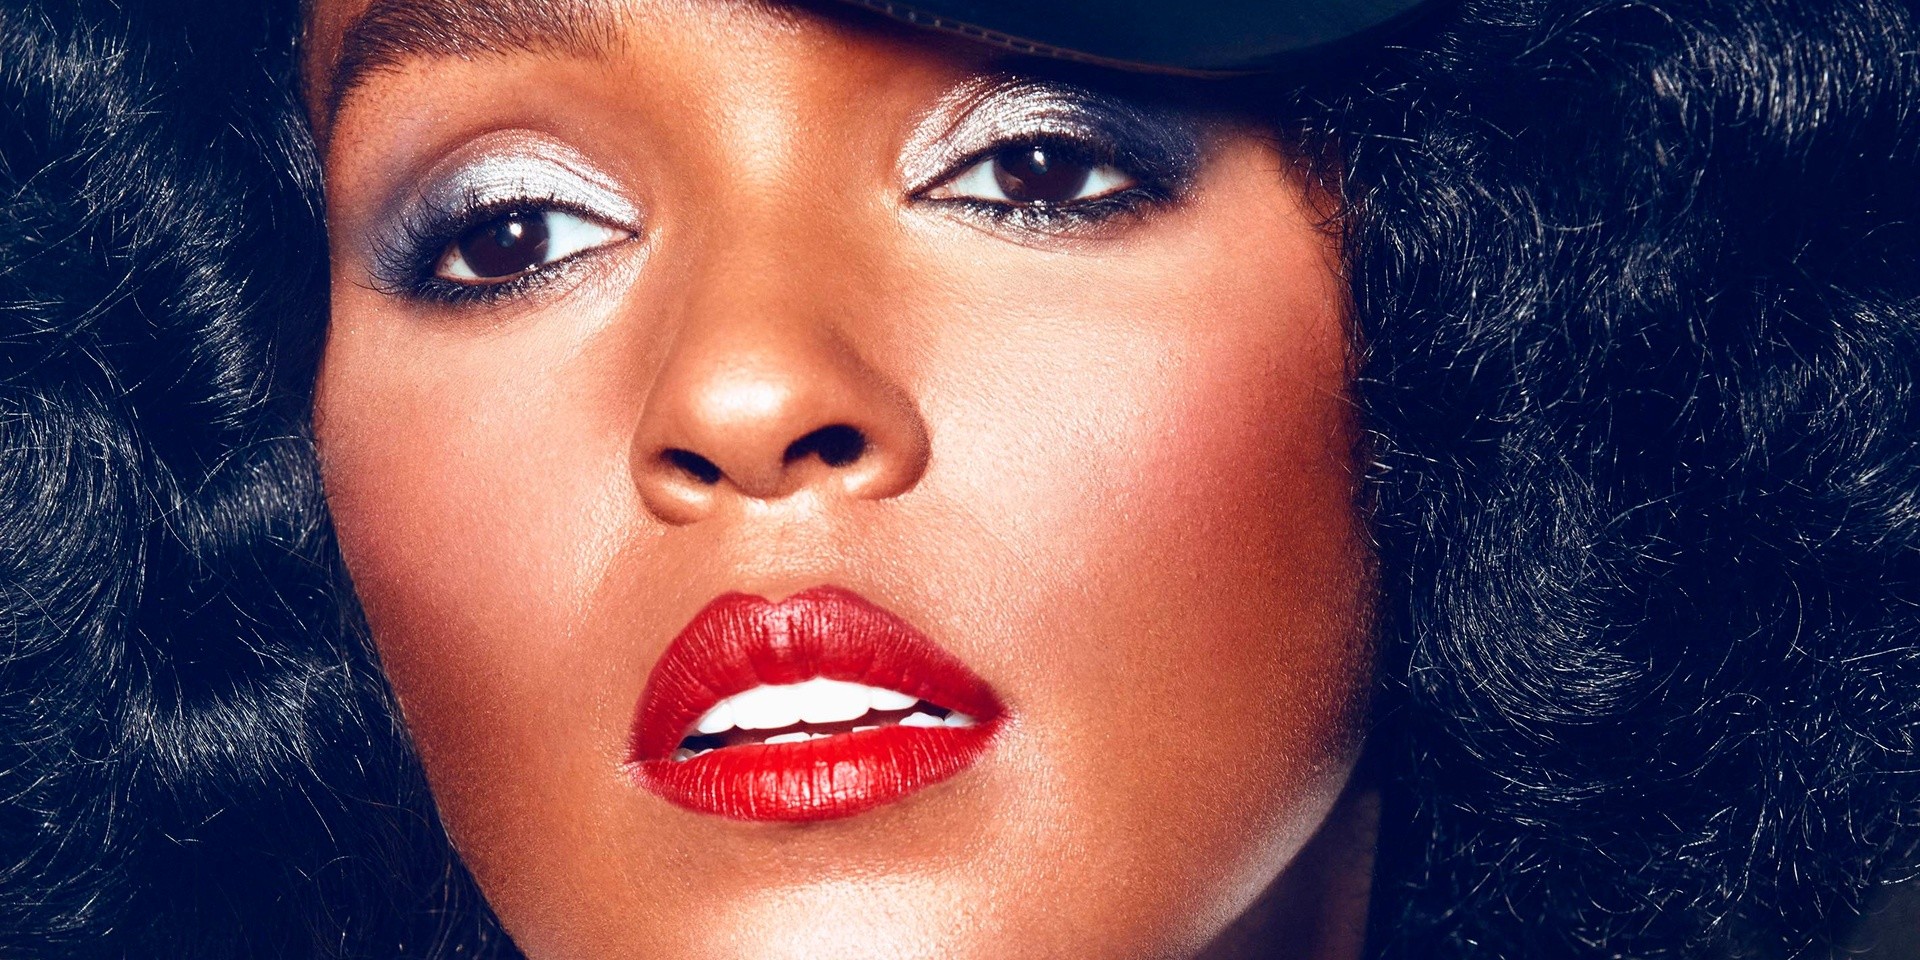 Janelle Monáe releases stunning music videos for two new songs, 'Make Me Feel' and 'Django Jane' – watch